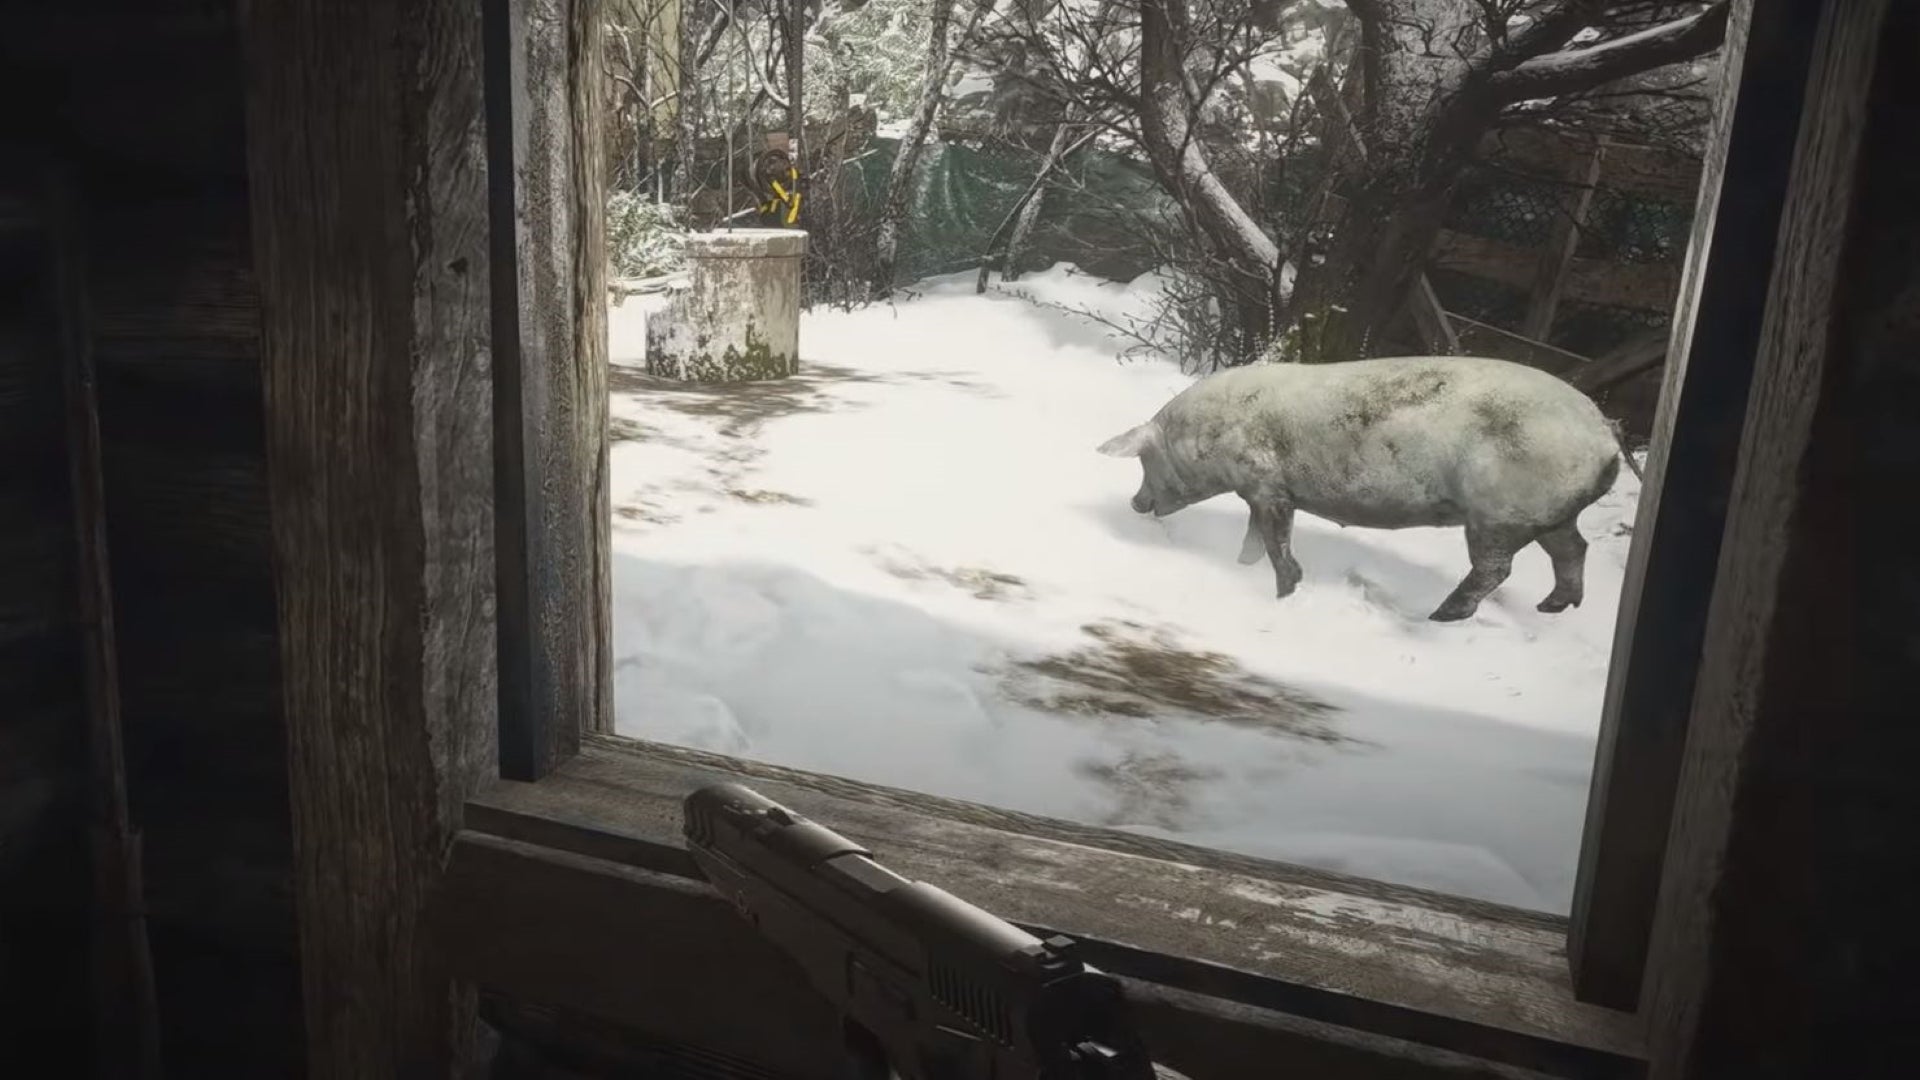 An image of the player looking at a large white pig in Resident Evil Village.